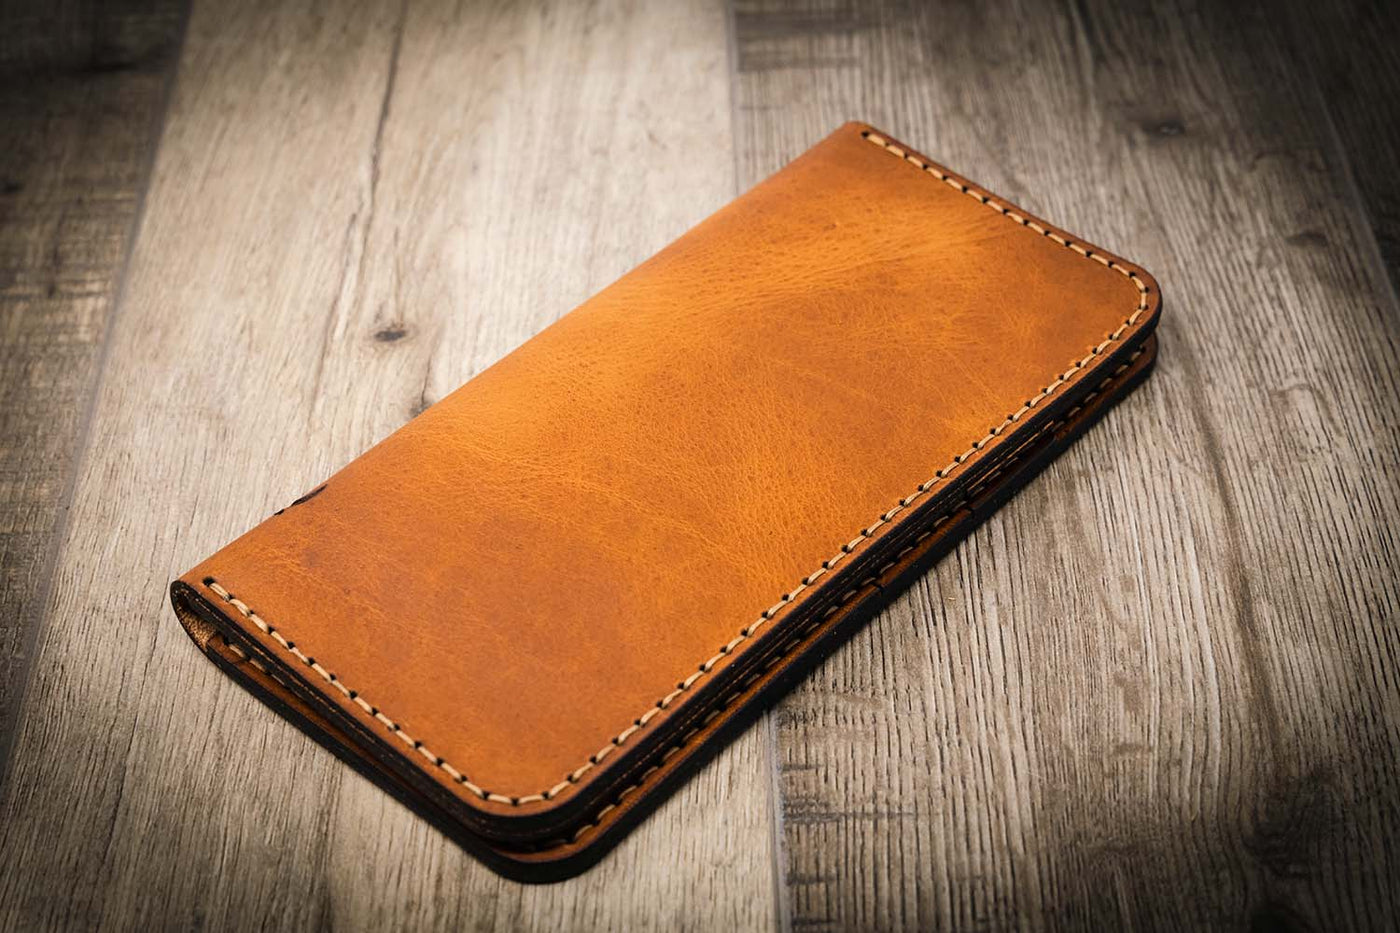 Custom Leather Long Wallet made in America